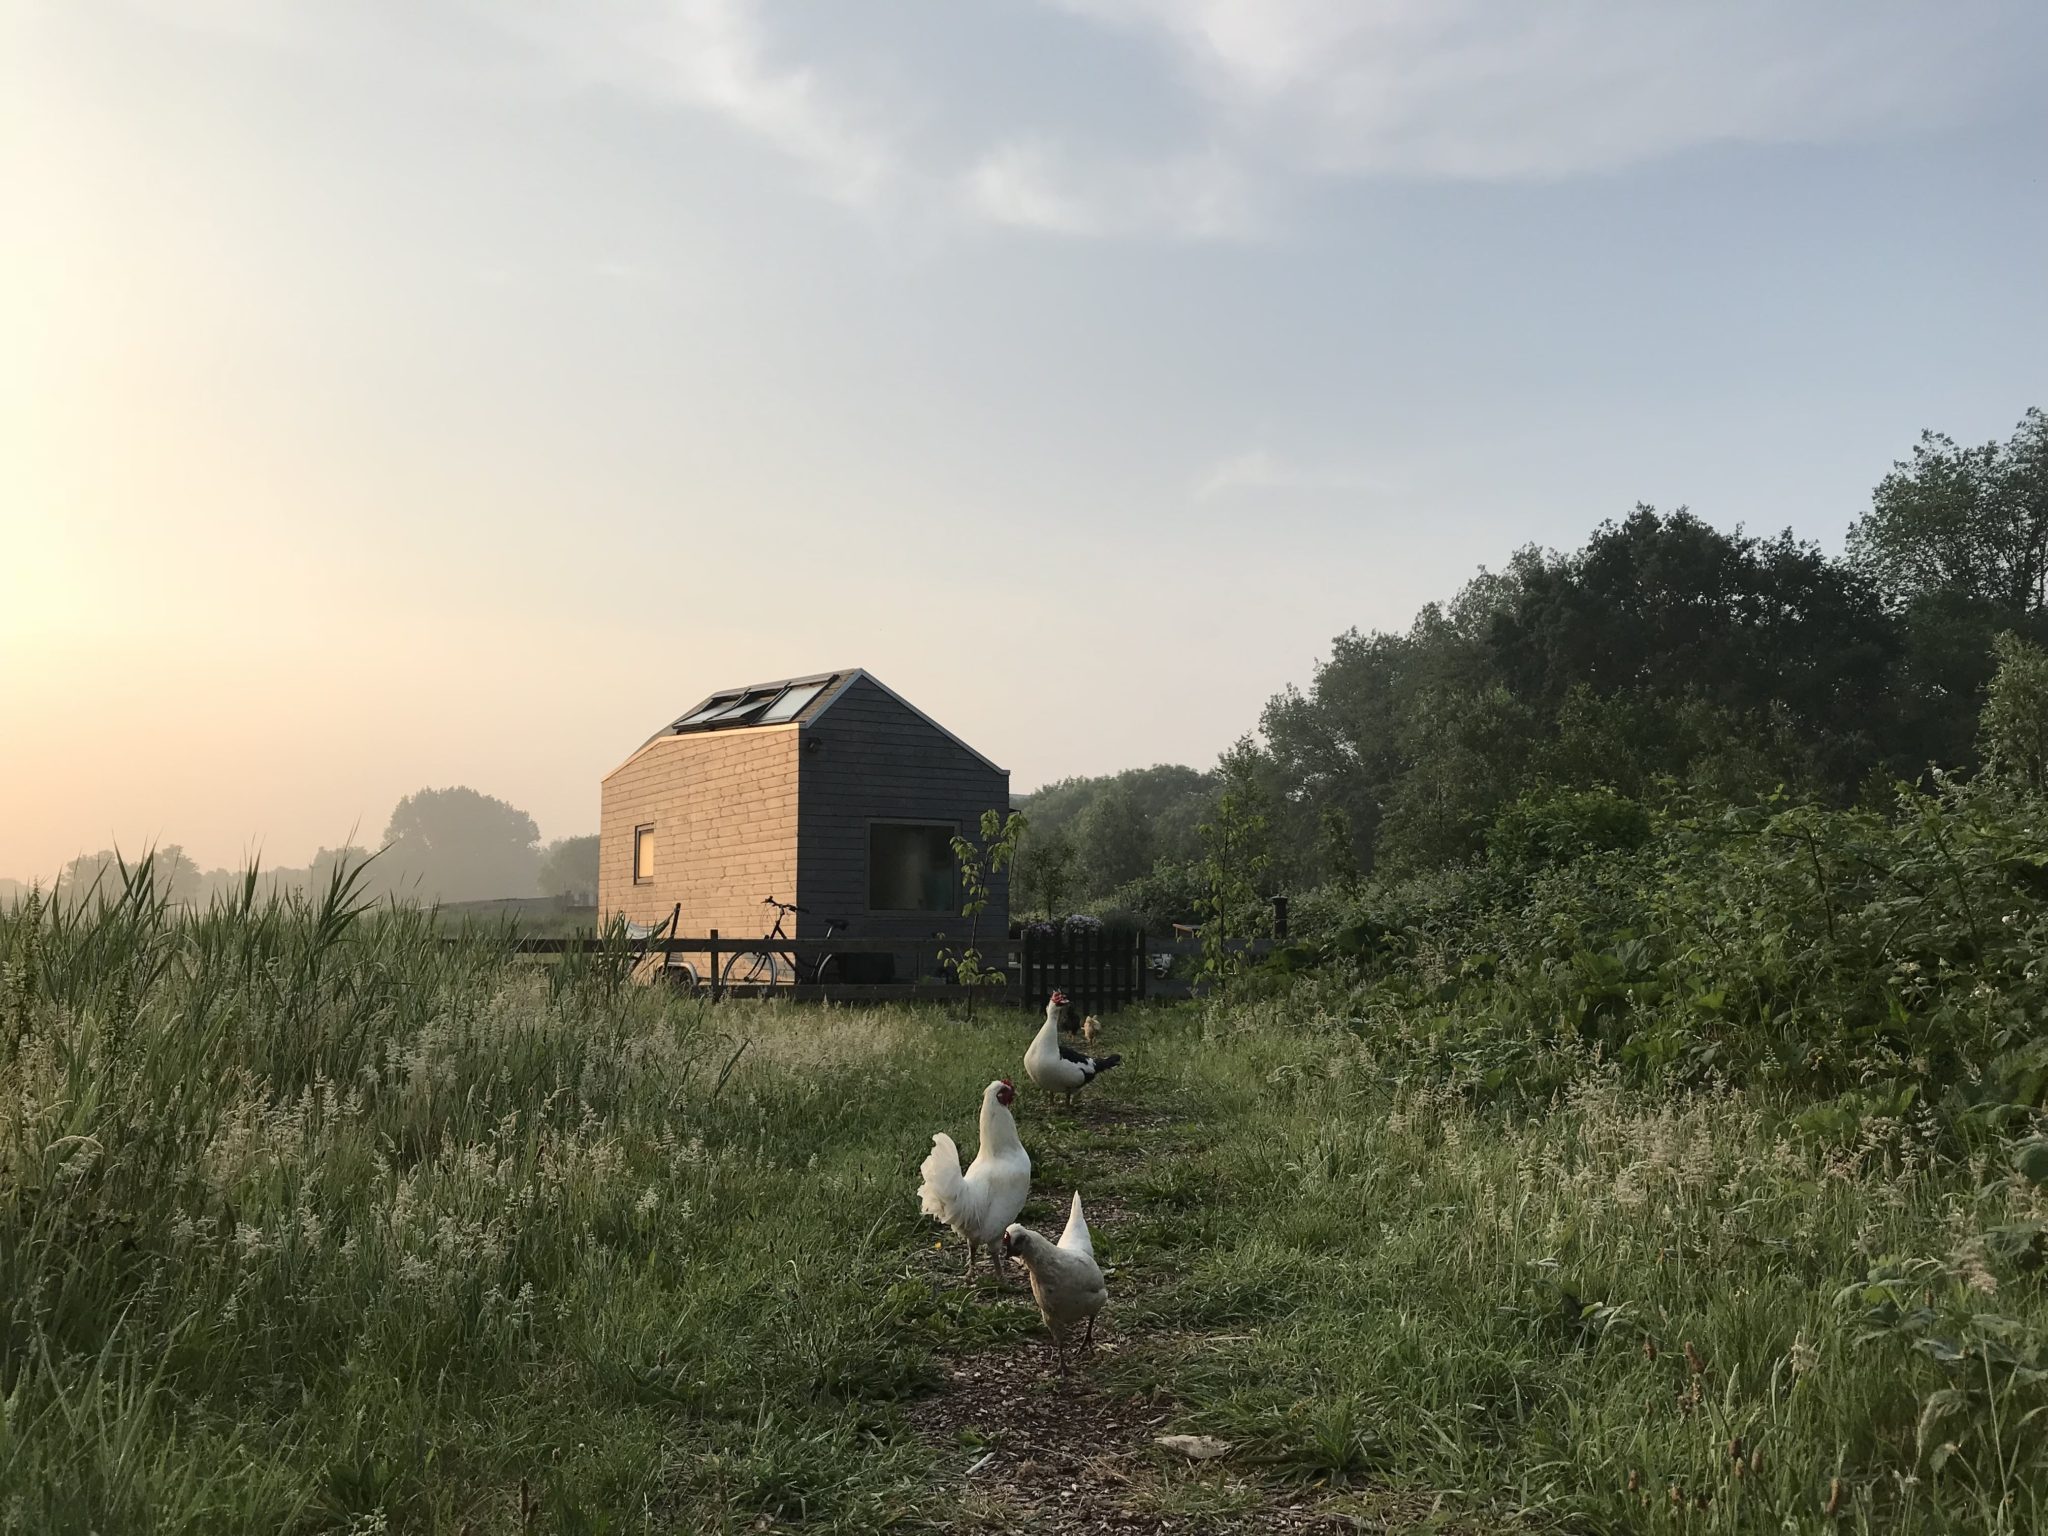 Tiny House in field with chickens